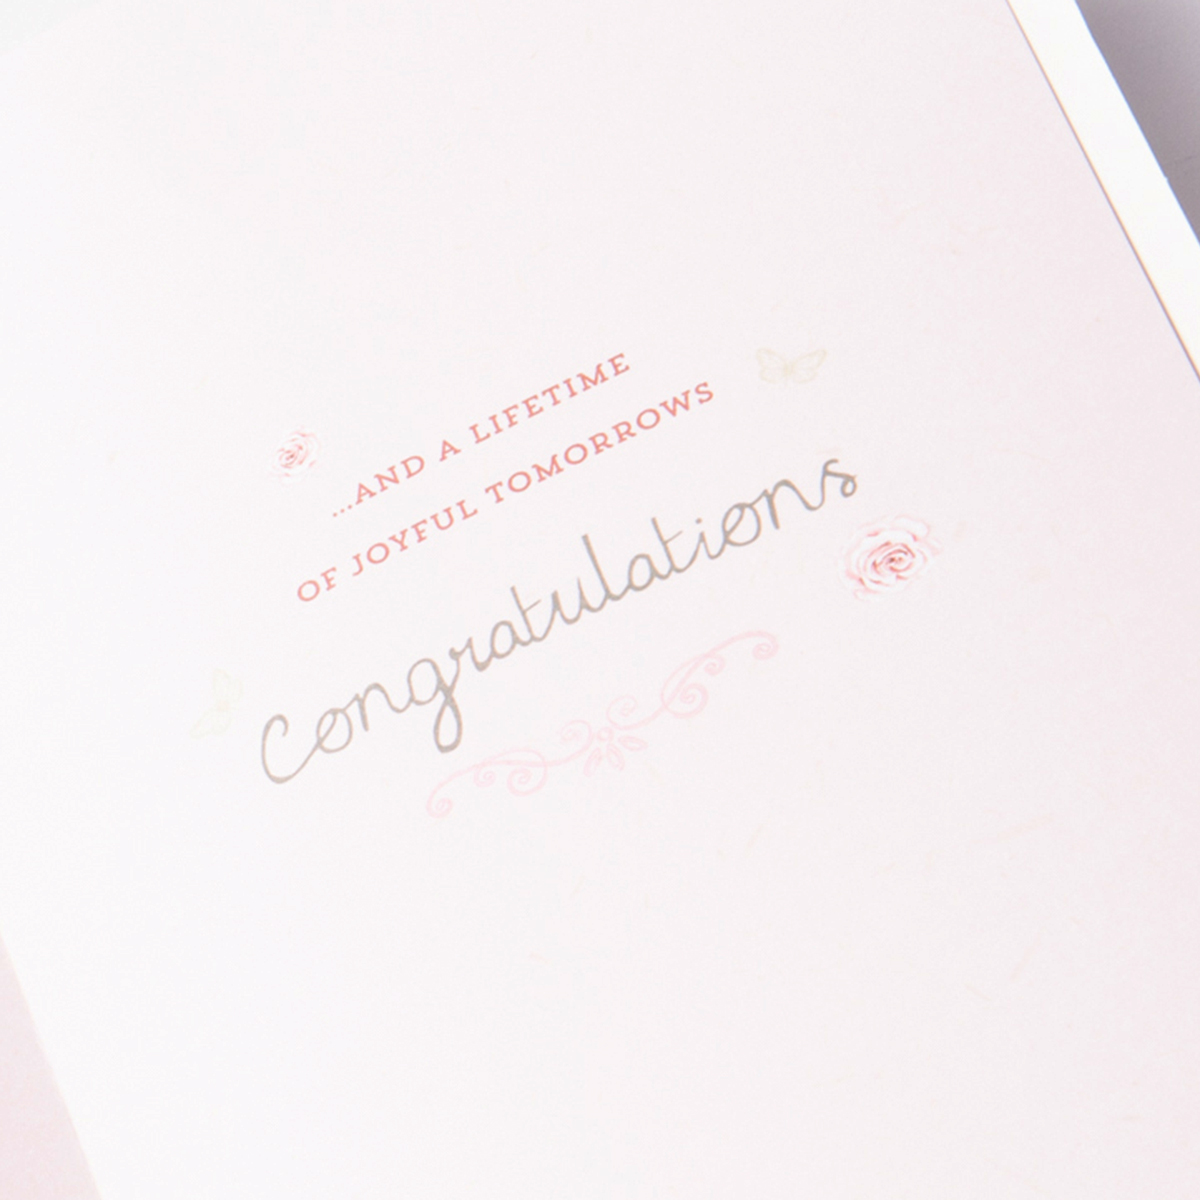 Wedding Card - Much Happiness Today